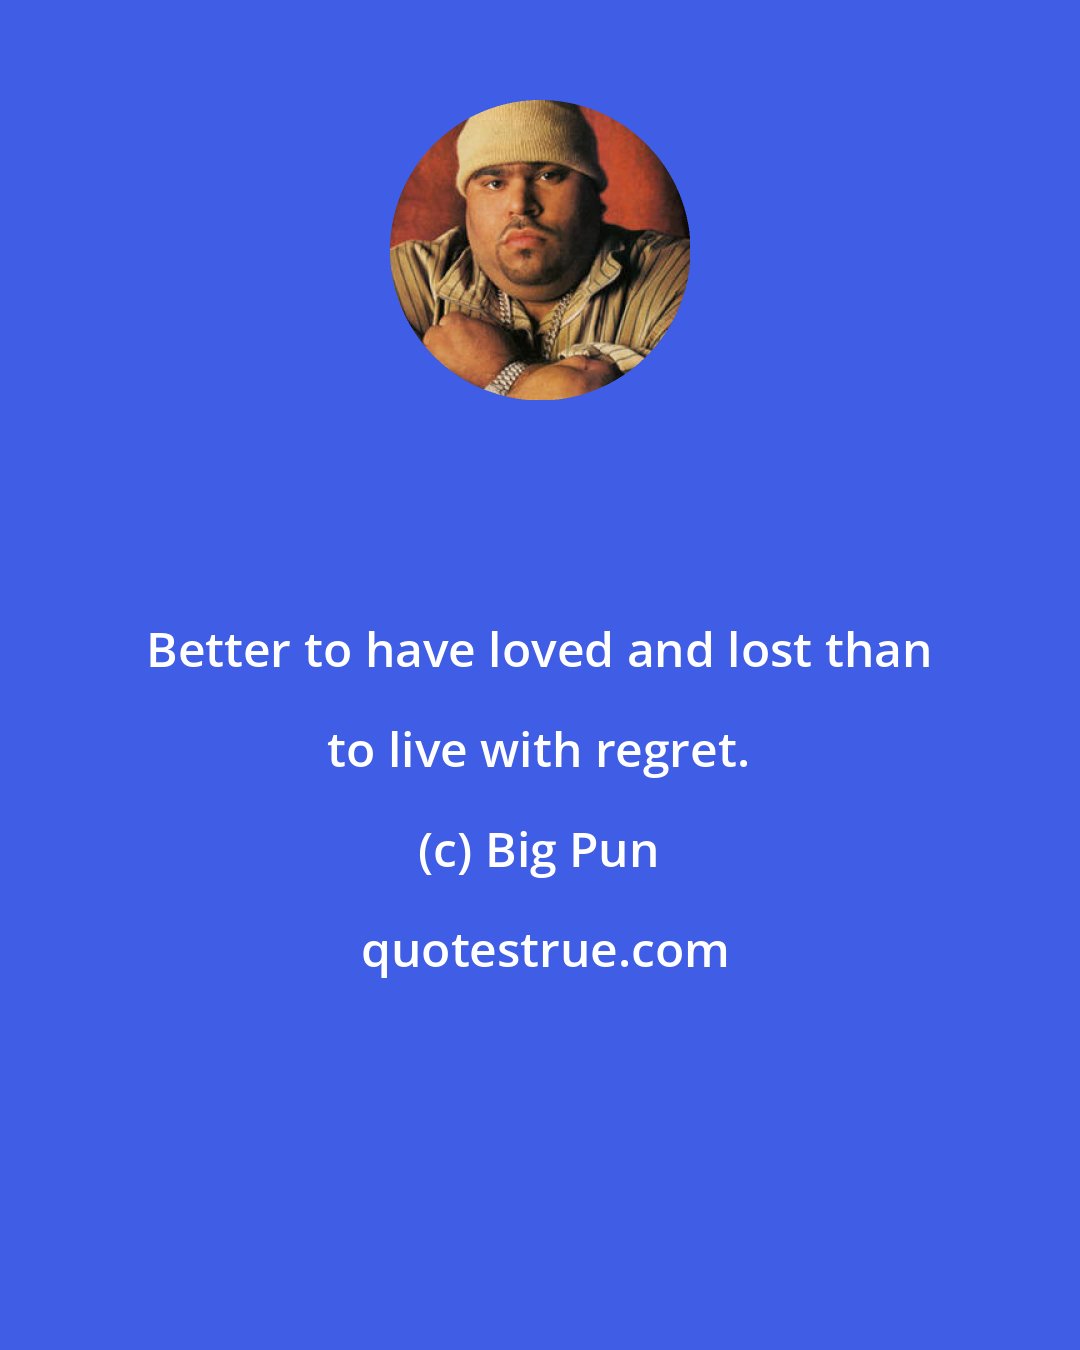 Big Pun: Better to have loved and lost than to live with regret.